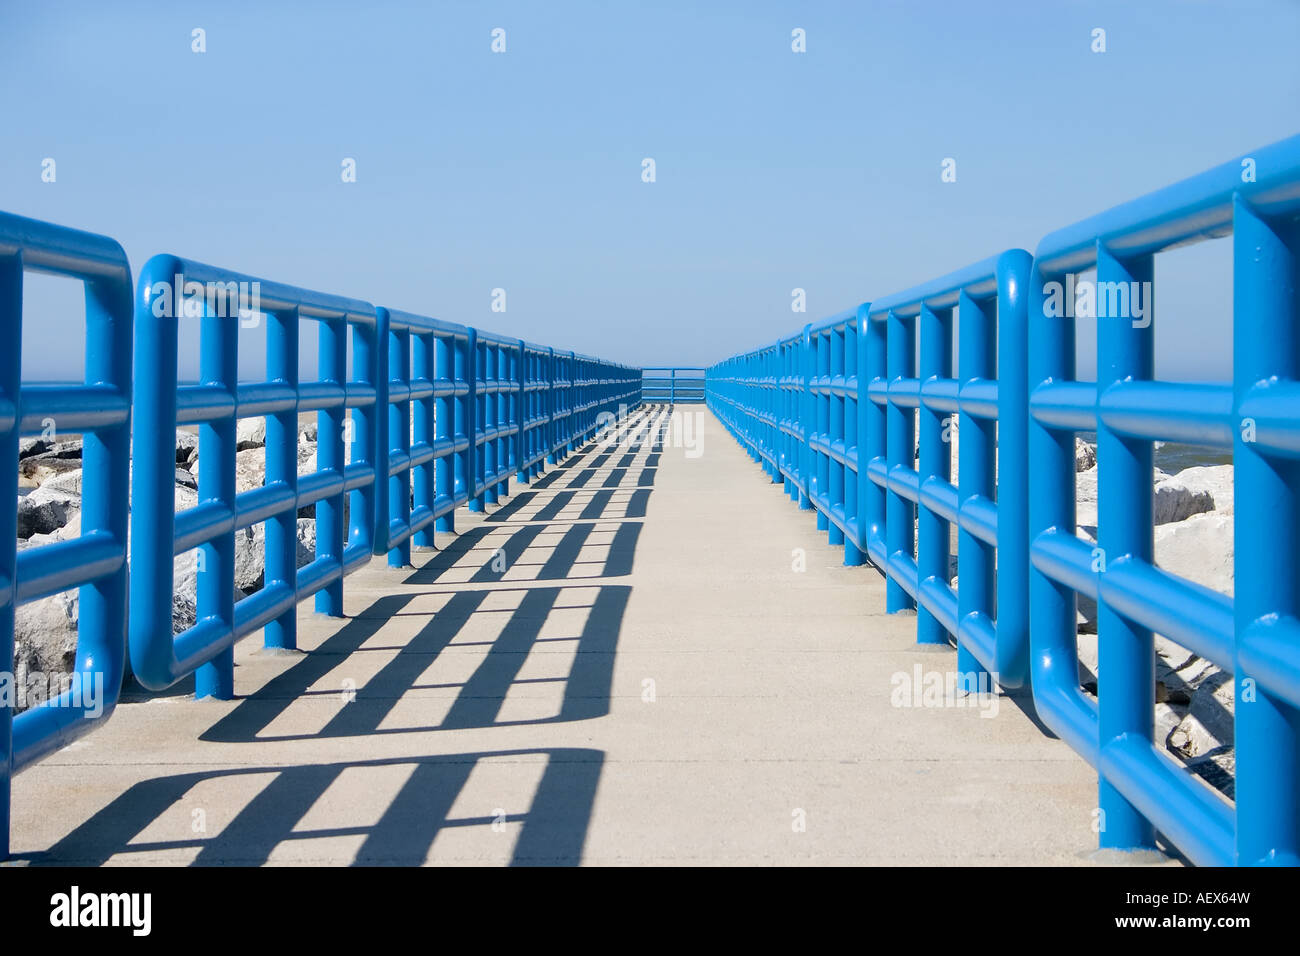 Concrete walkway bounded by blue safety rails Stock Photo